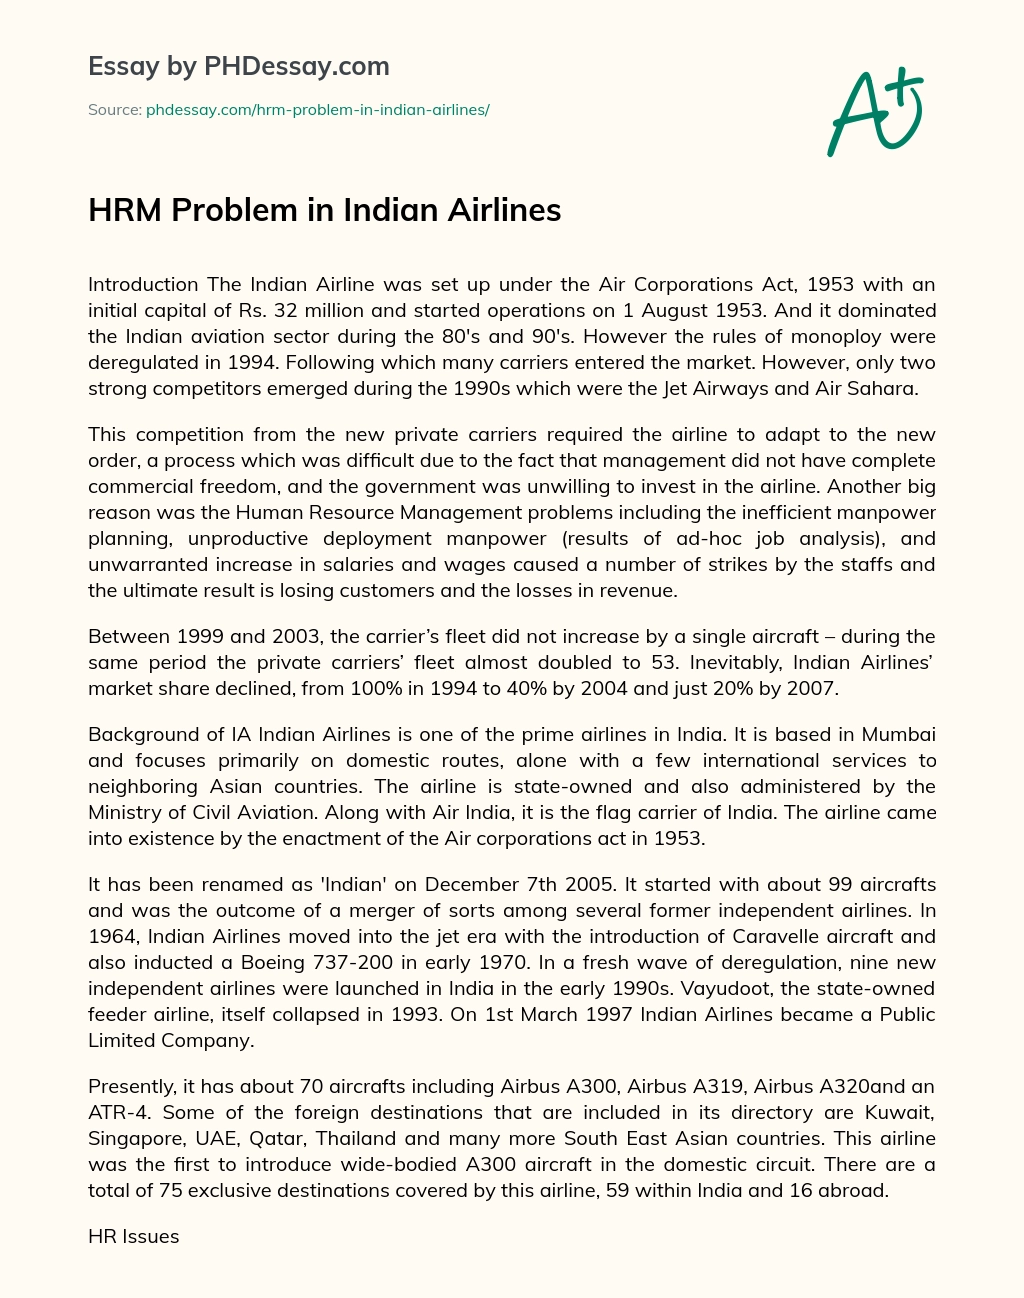 HRM Problem in Indian Airlines essay